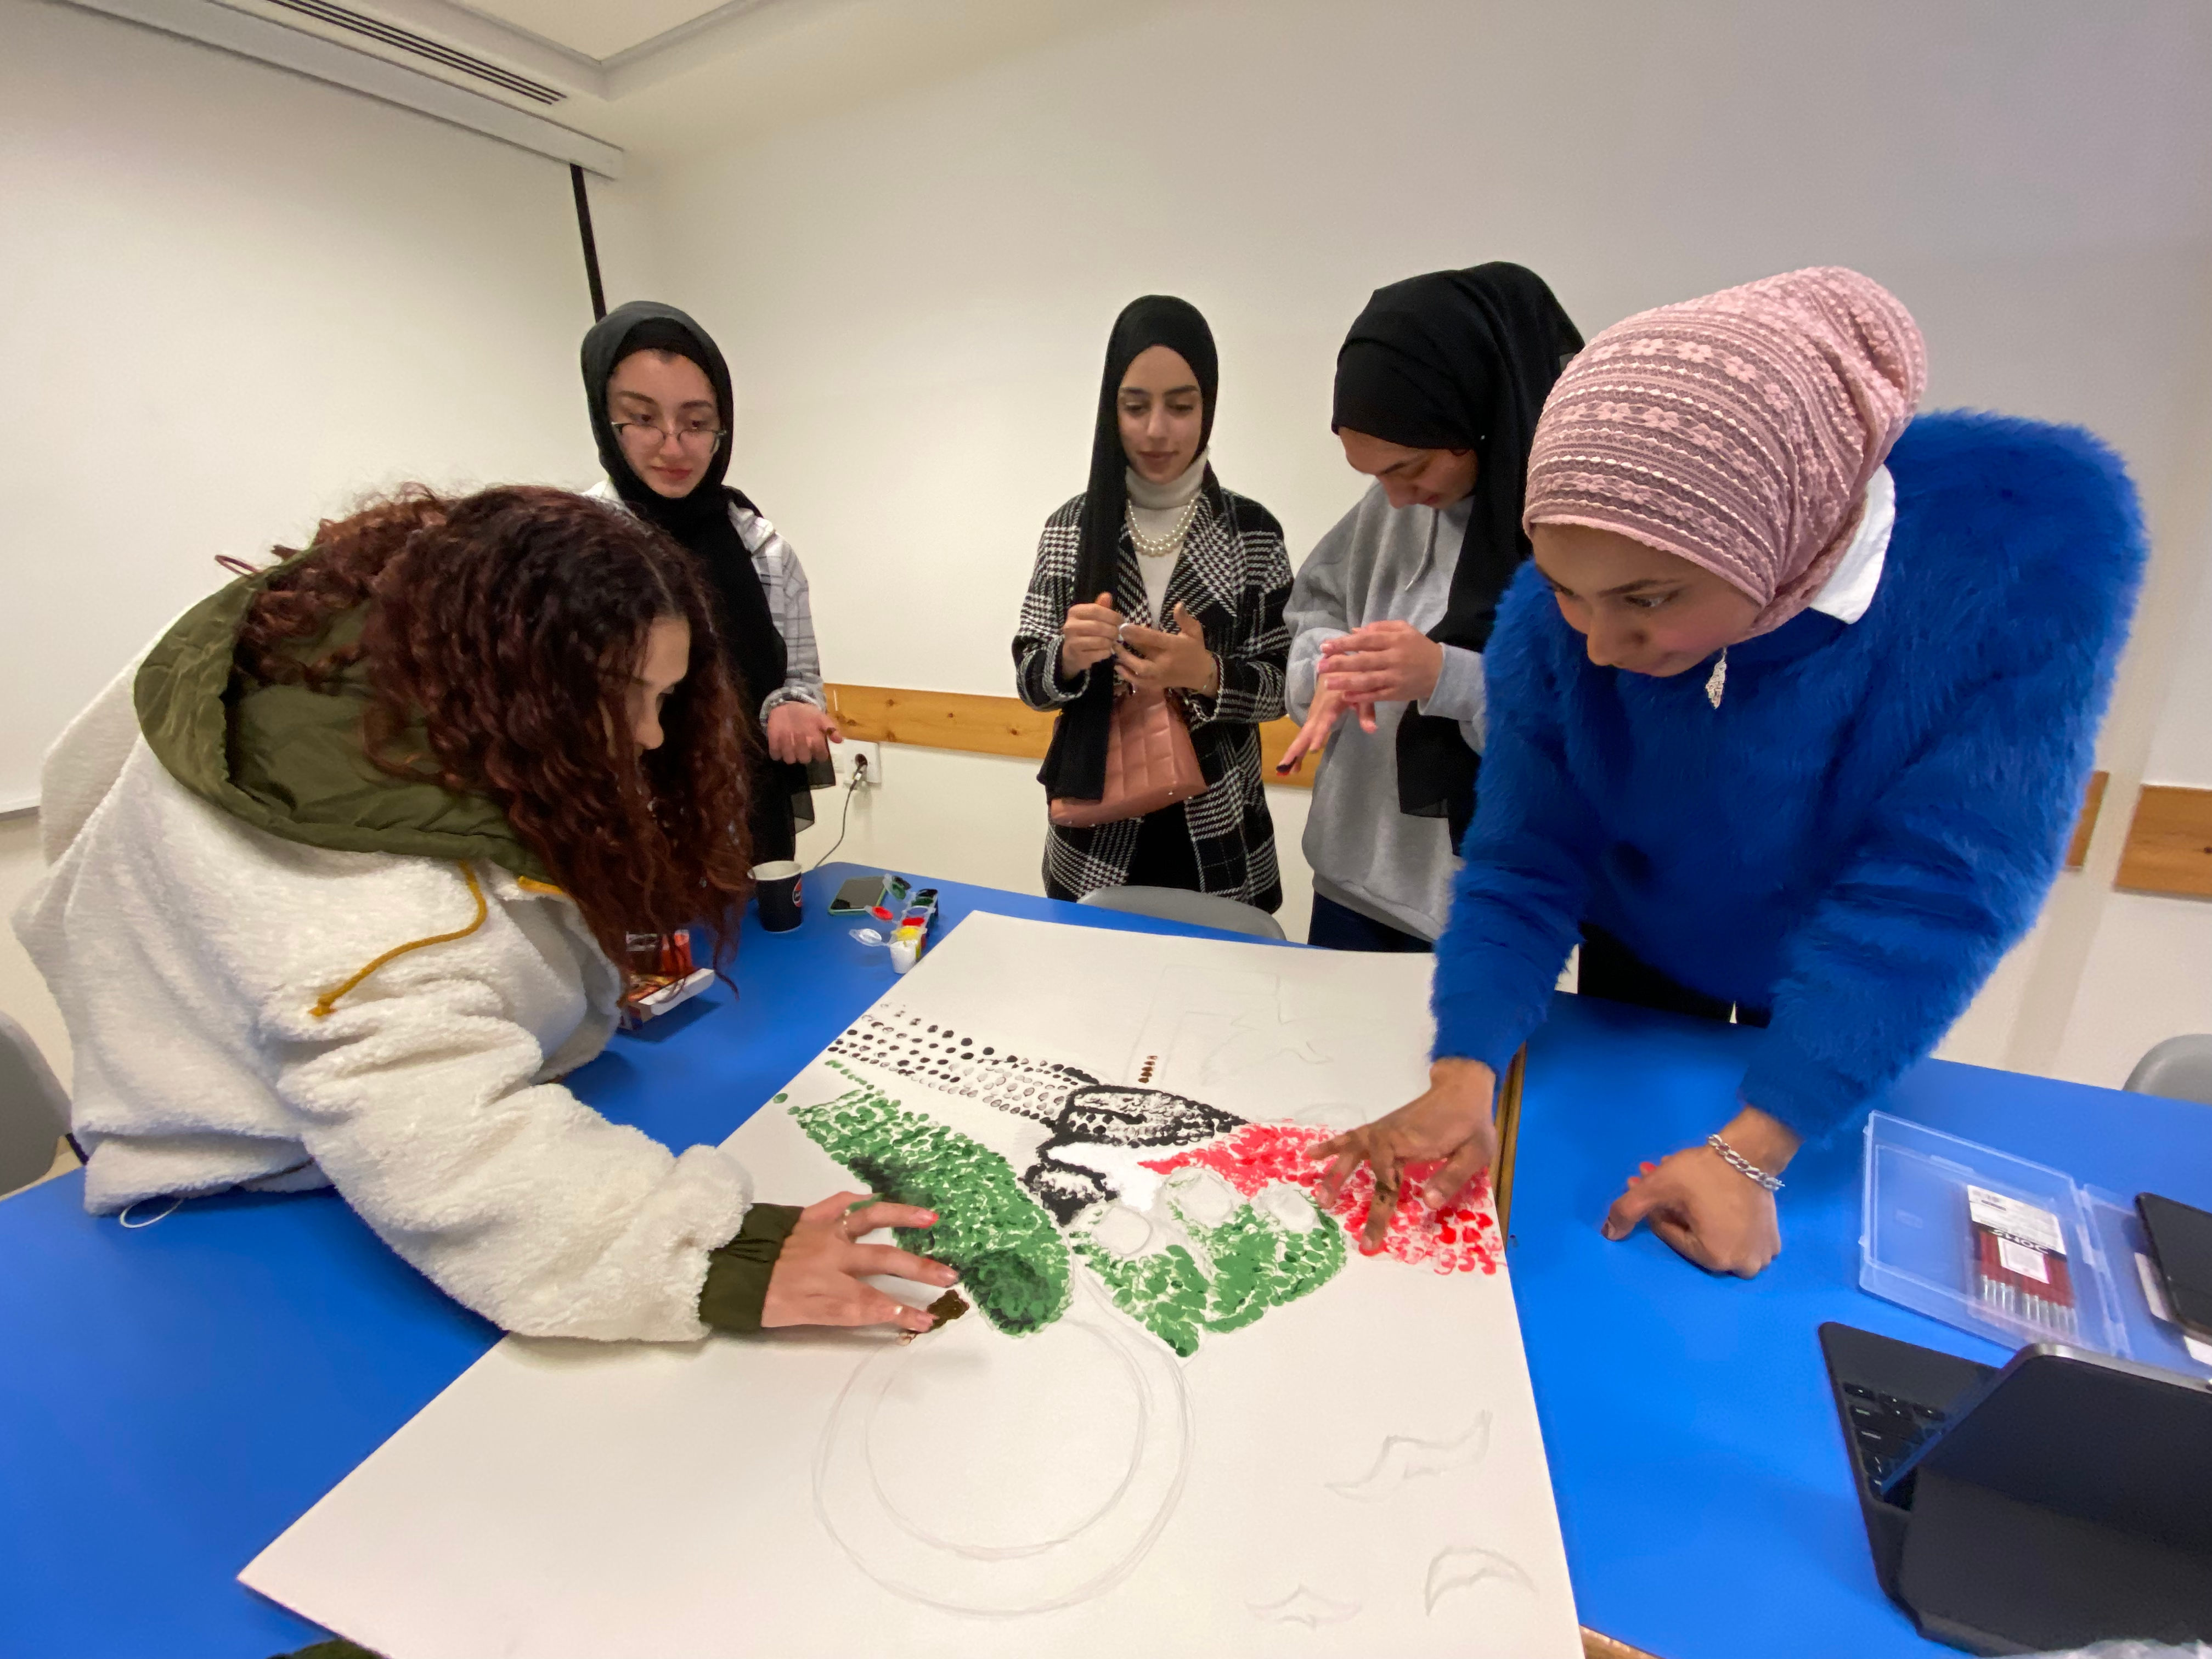 Five students work on a painting composed of many fingerprints, in the colors of the Palestinian flag.